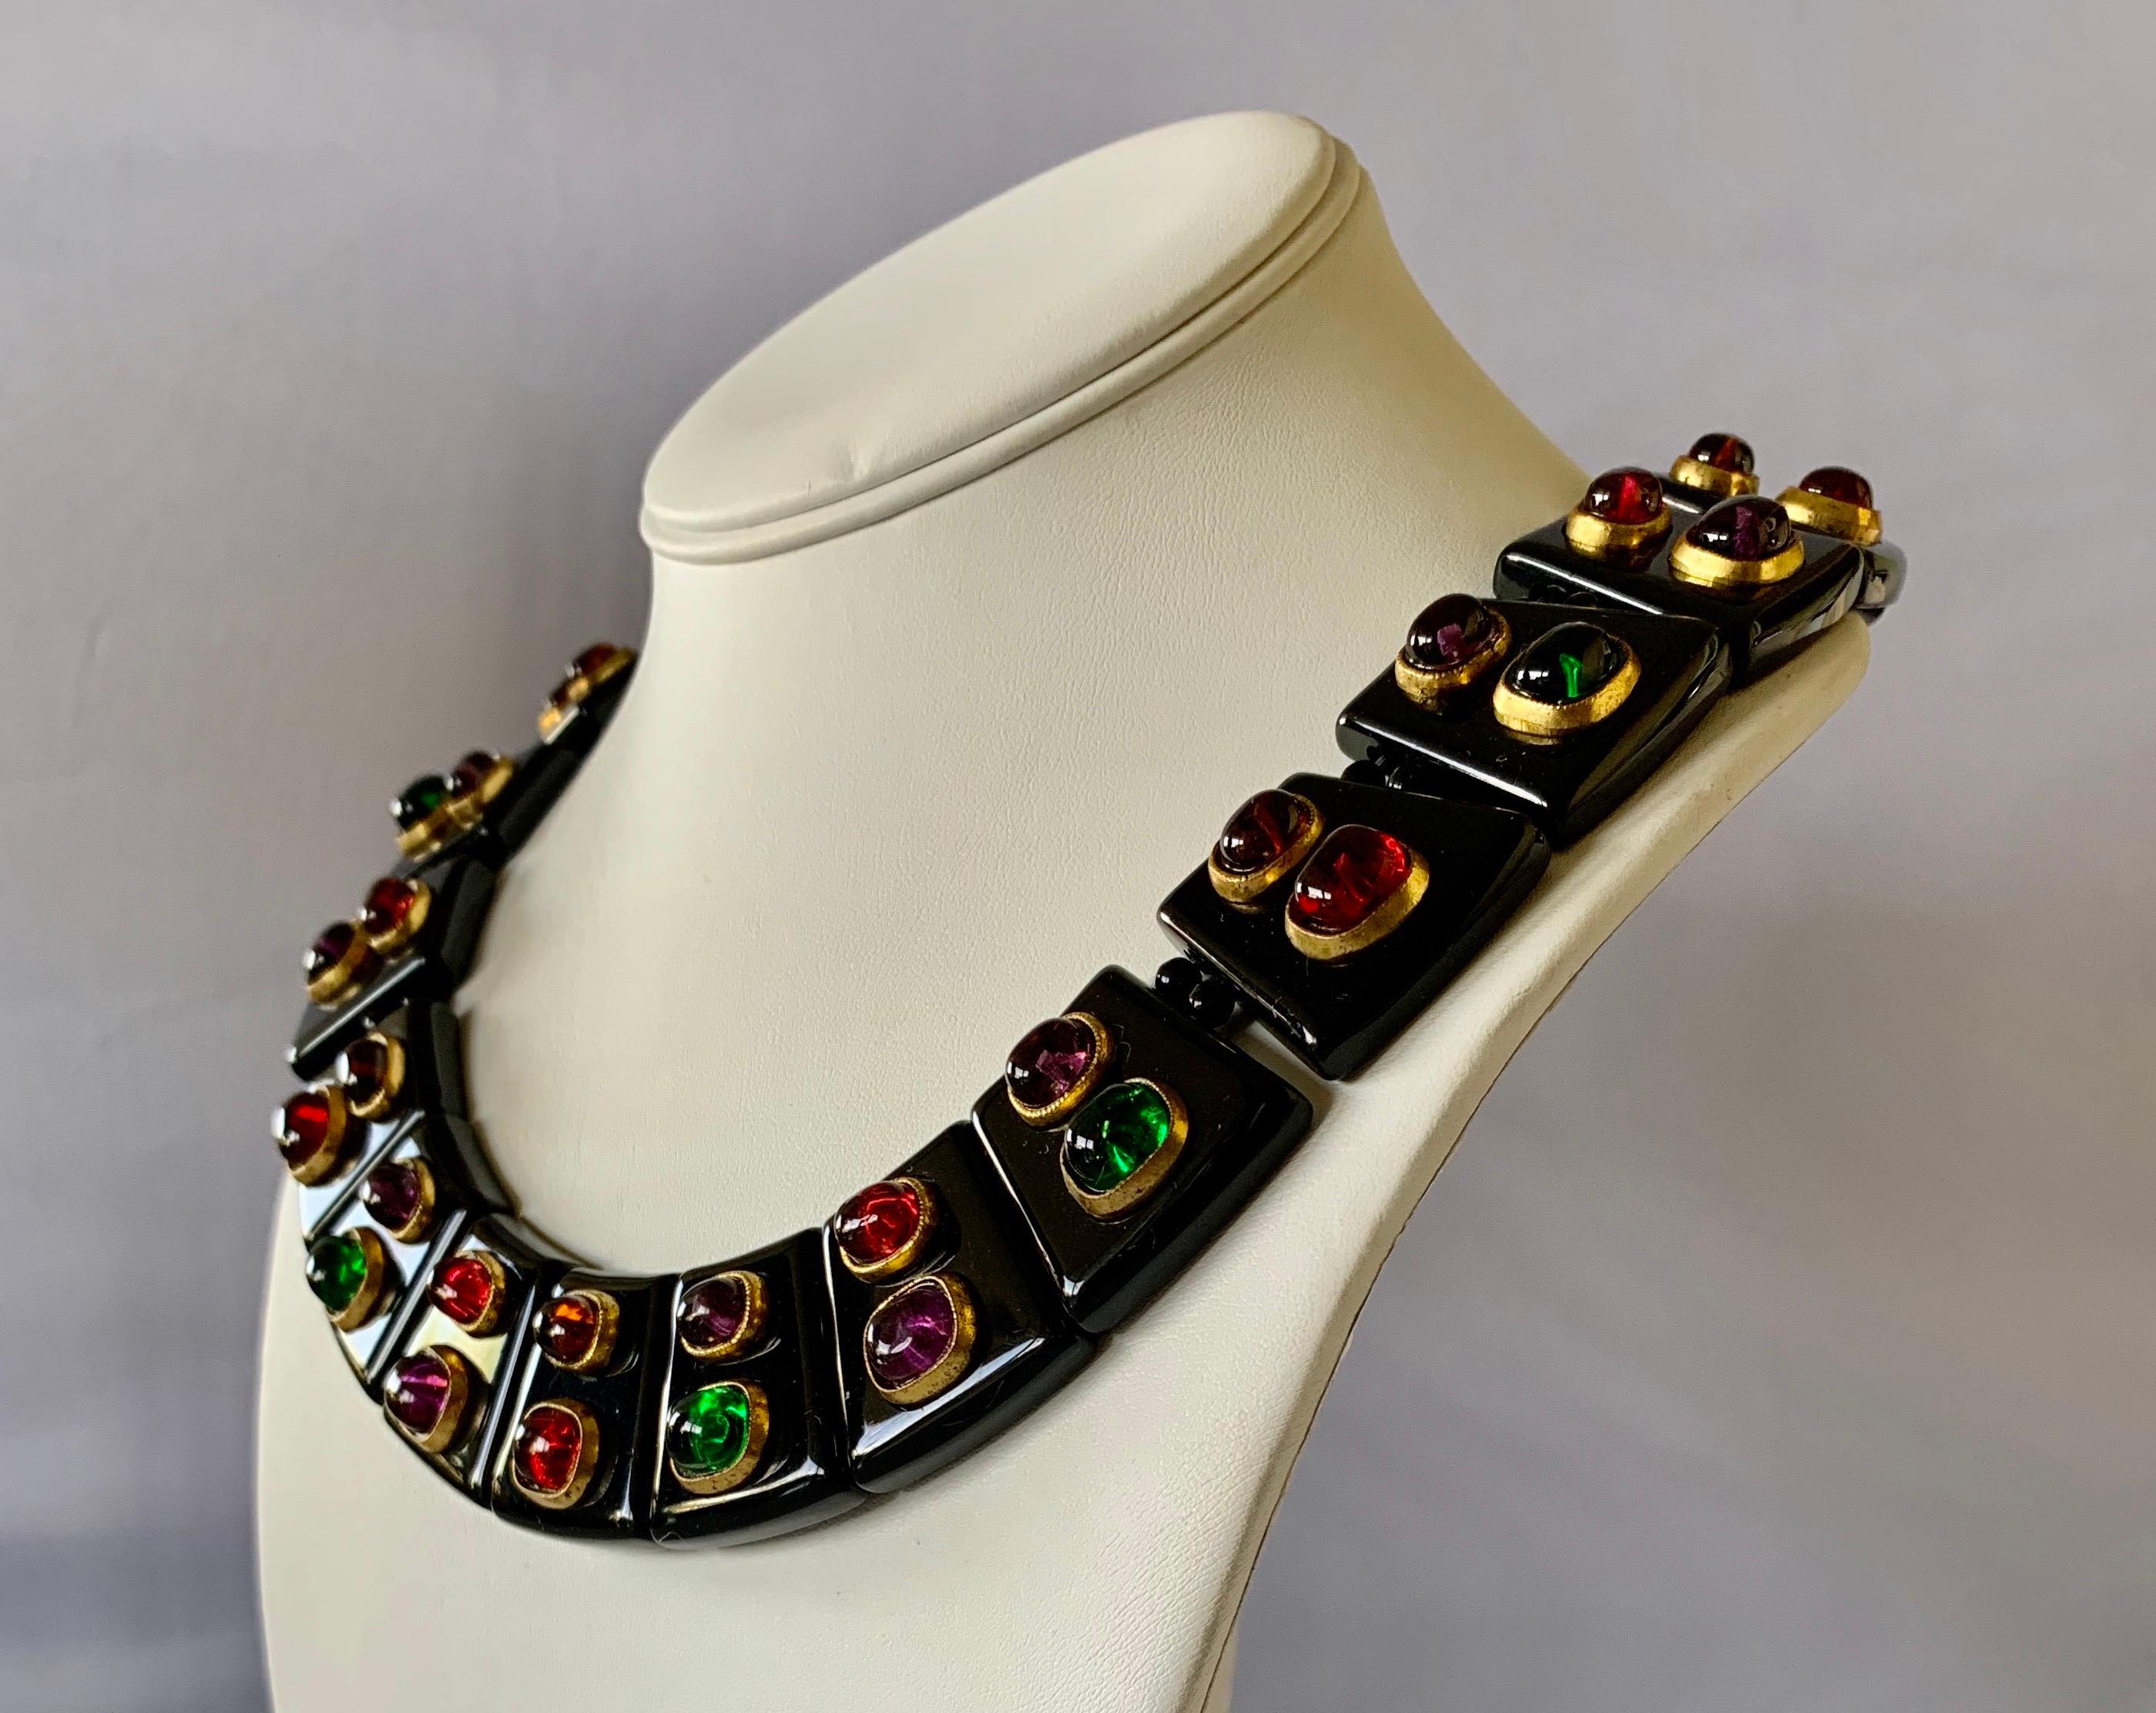 Splendid and scare Coco Chanel jeweled collar statement necklace - comprised out of articulated black French Bakelite 